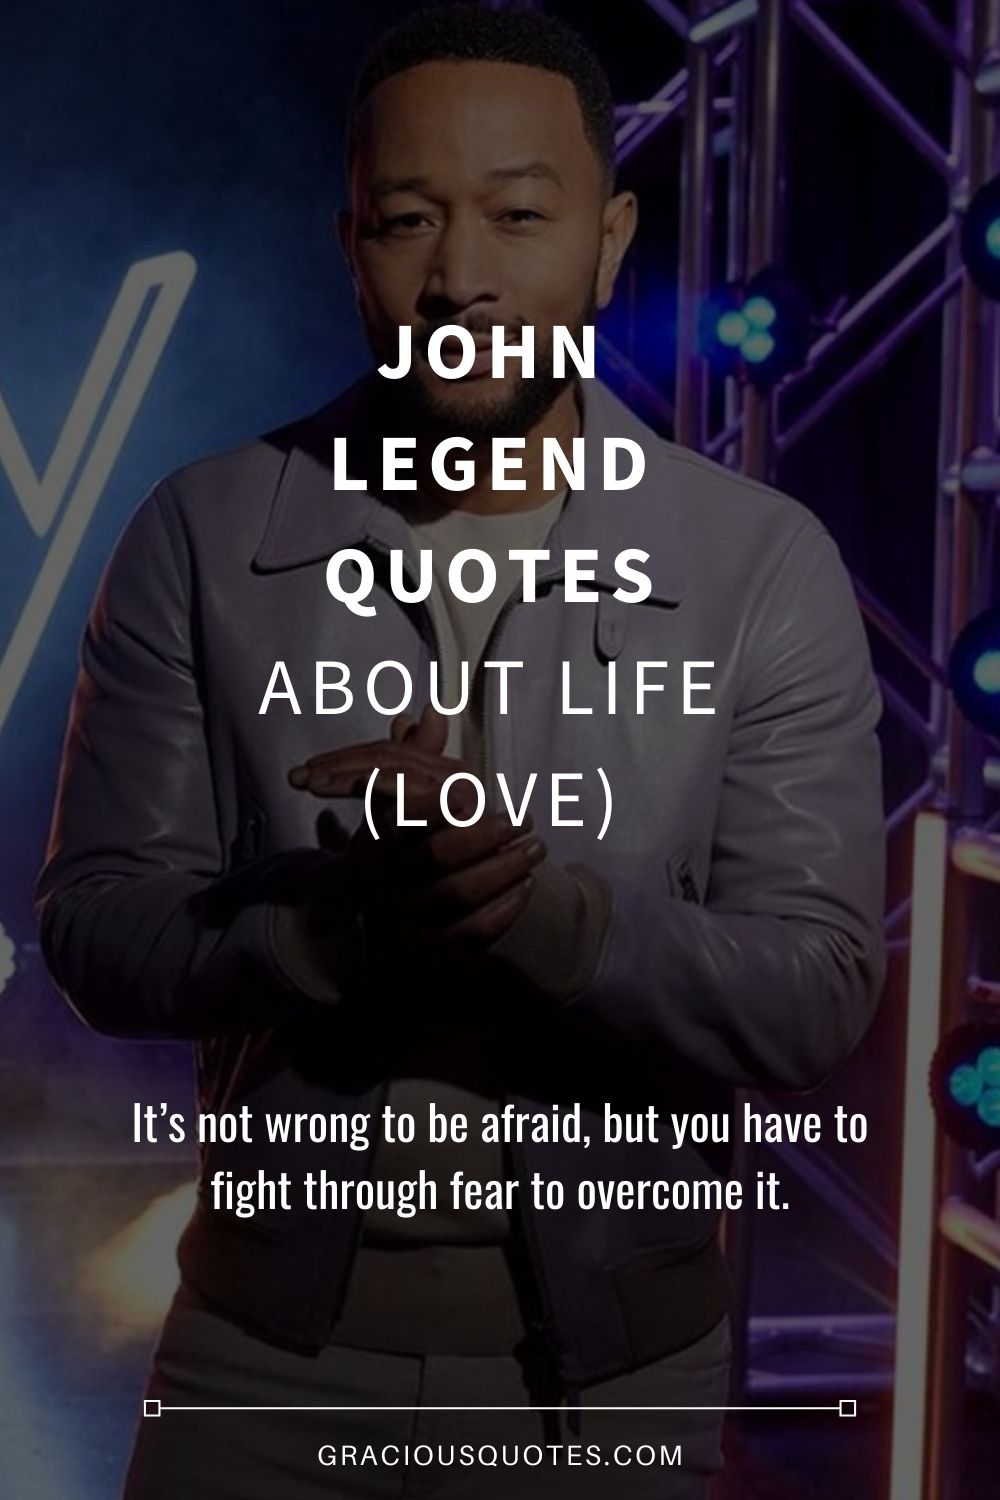 John Legend Quotes About Life (LOVE) - Gracious Quotes